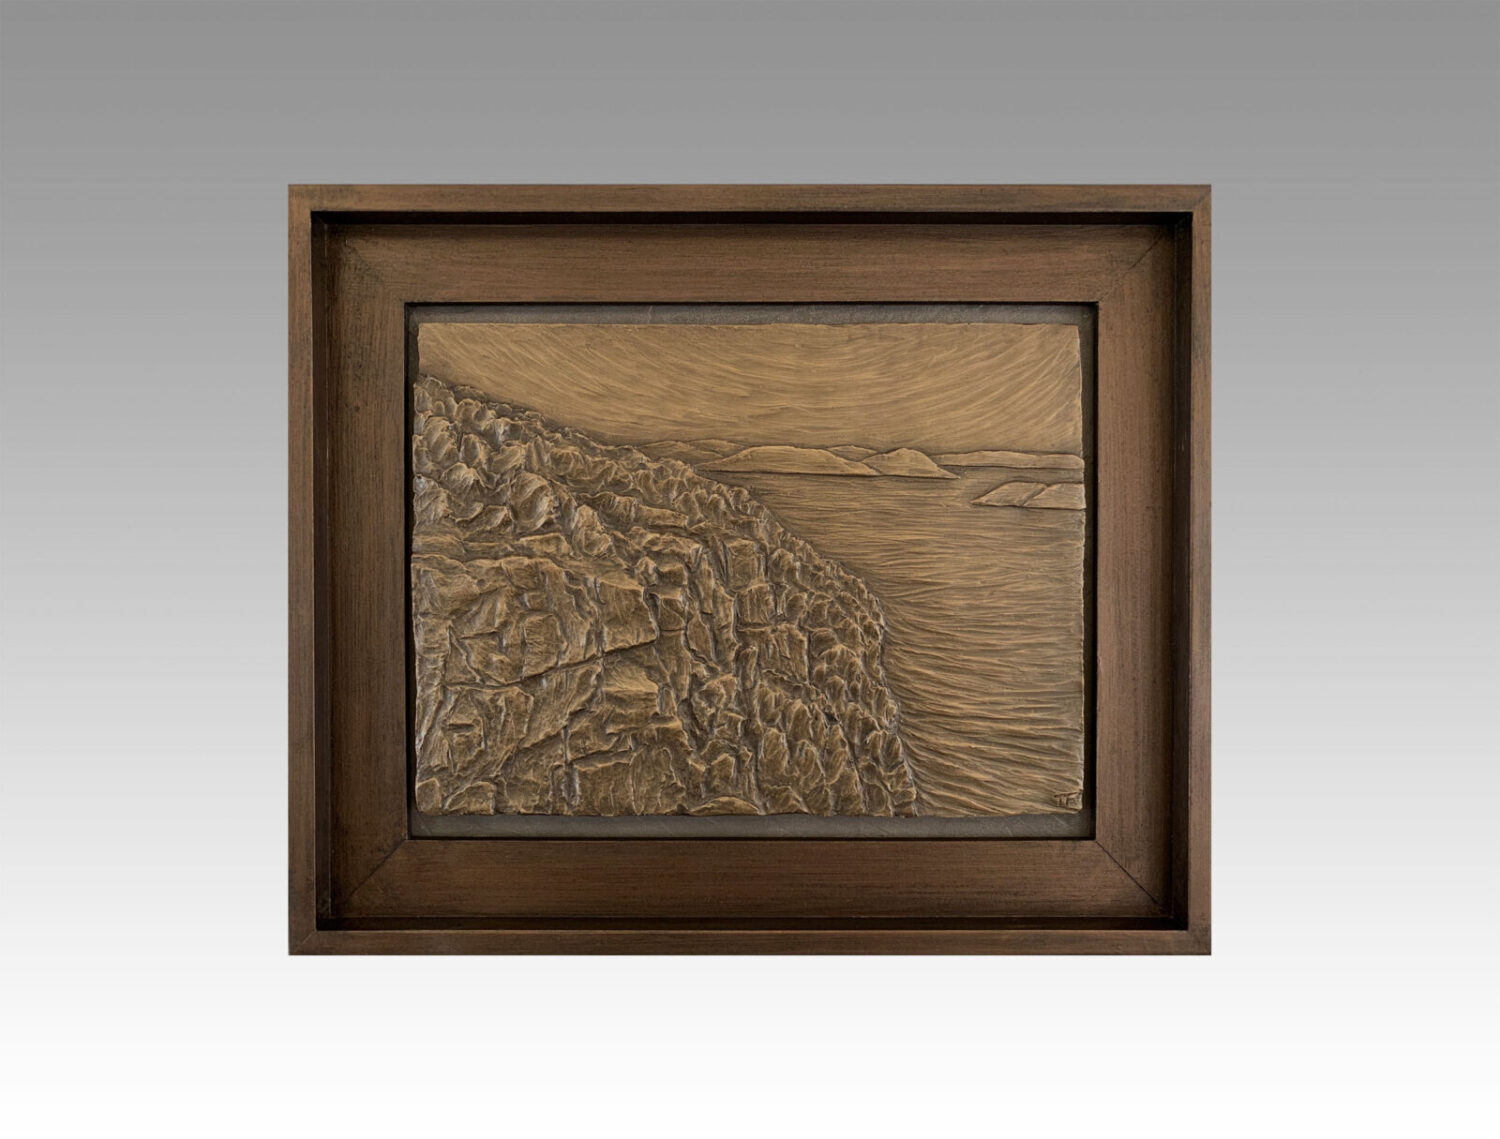 Gallery, The View from Here, $325 CAD, Metal Infused, 17 ¼” x 14 ½” (framed), Edition 60, Sculptural Relief of a magnificent landscape view, Sculptor Tyler Fauvelle